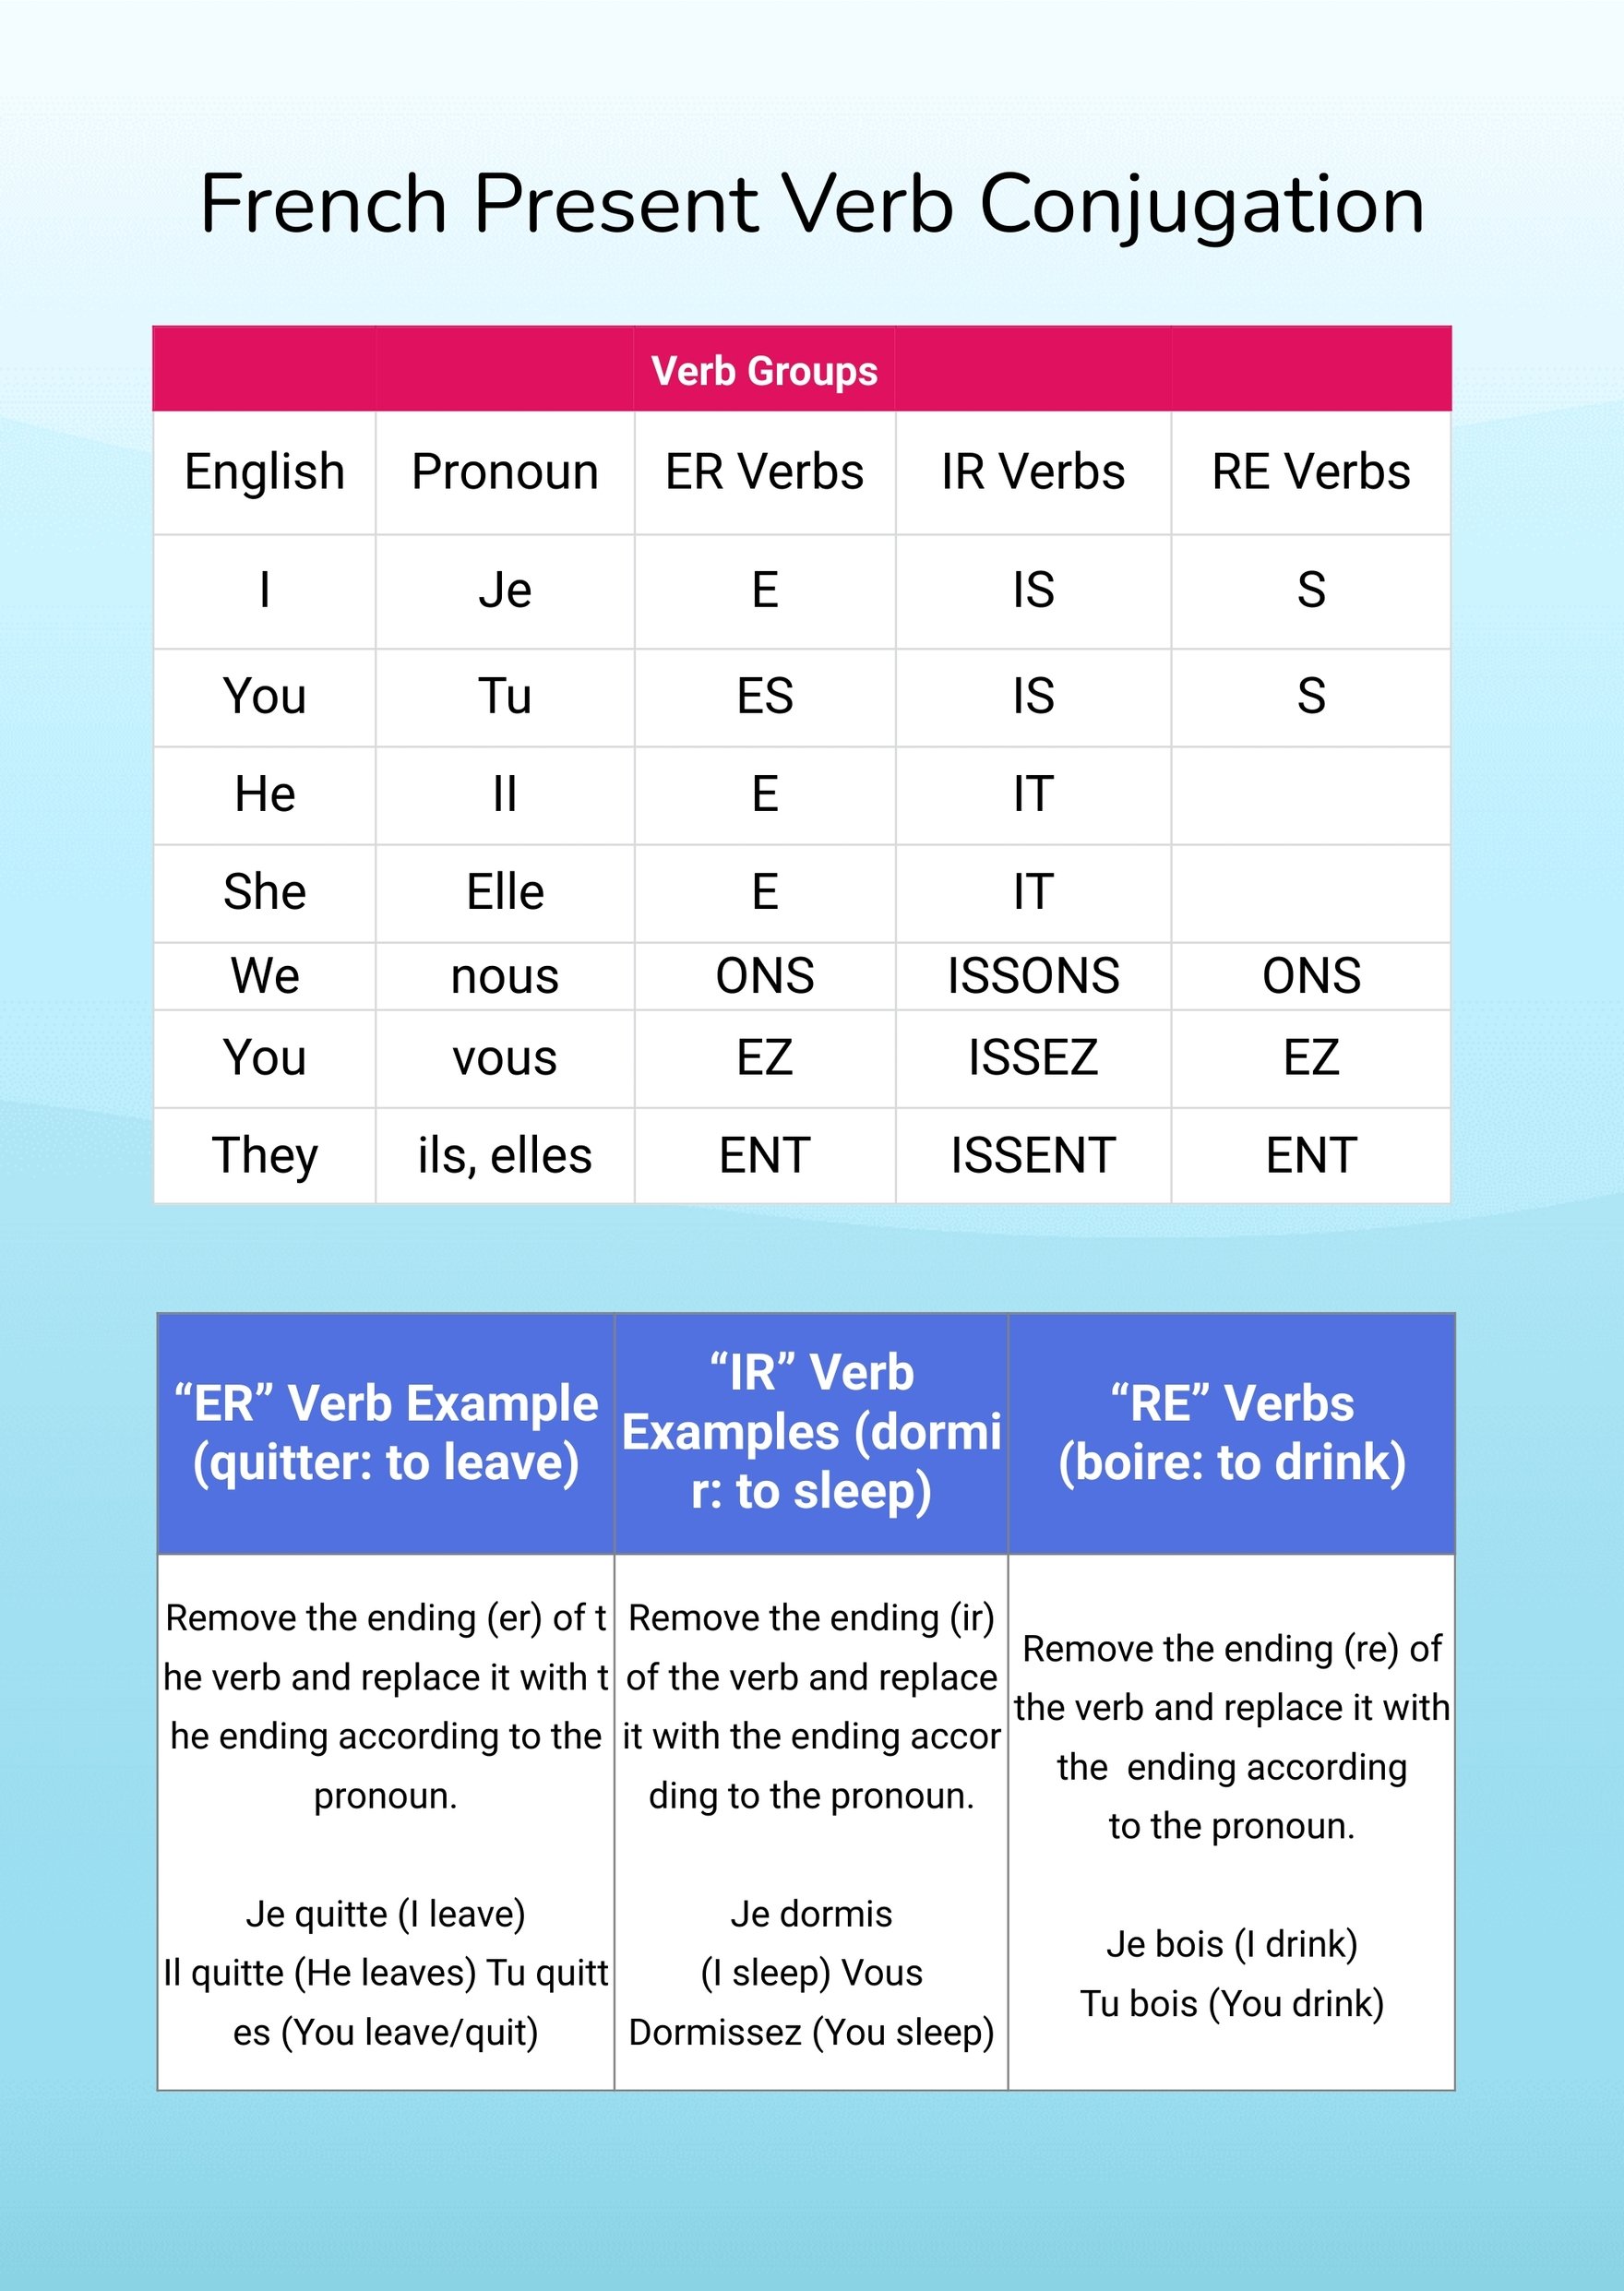 Free French Verb Conjugation Chart Download in PDF, Illustrator